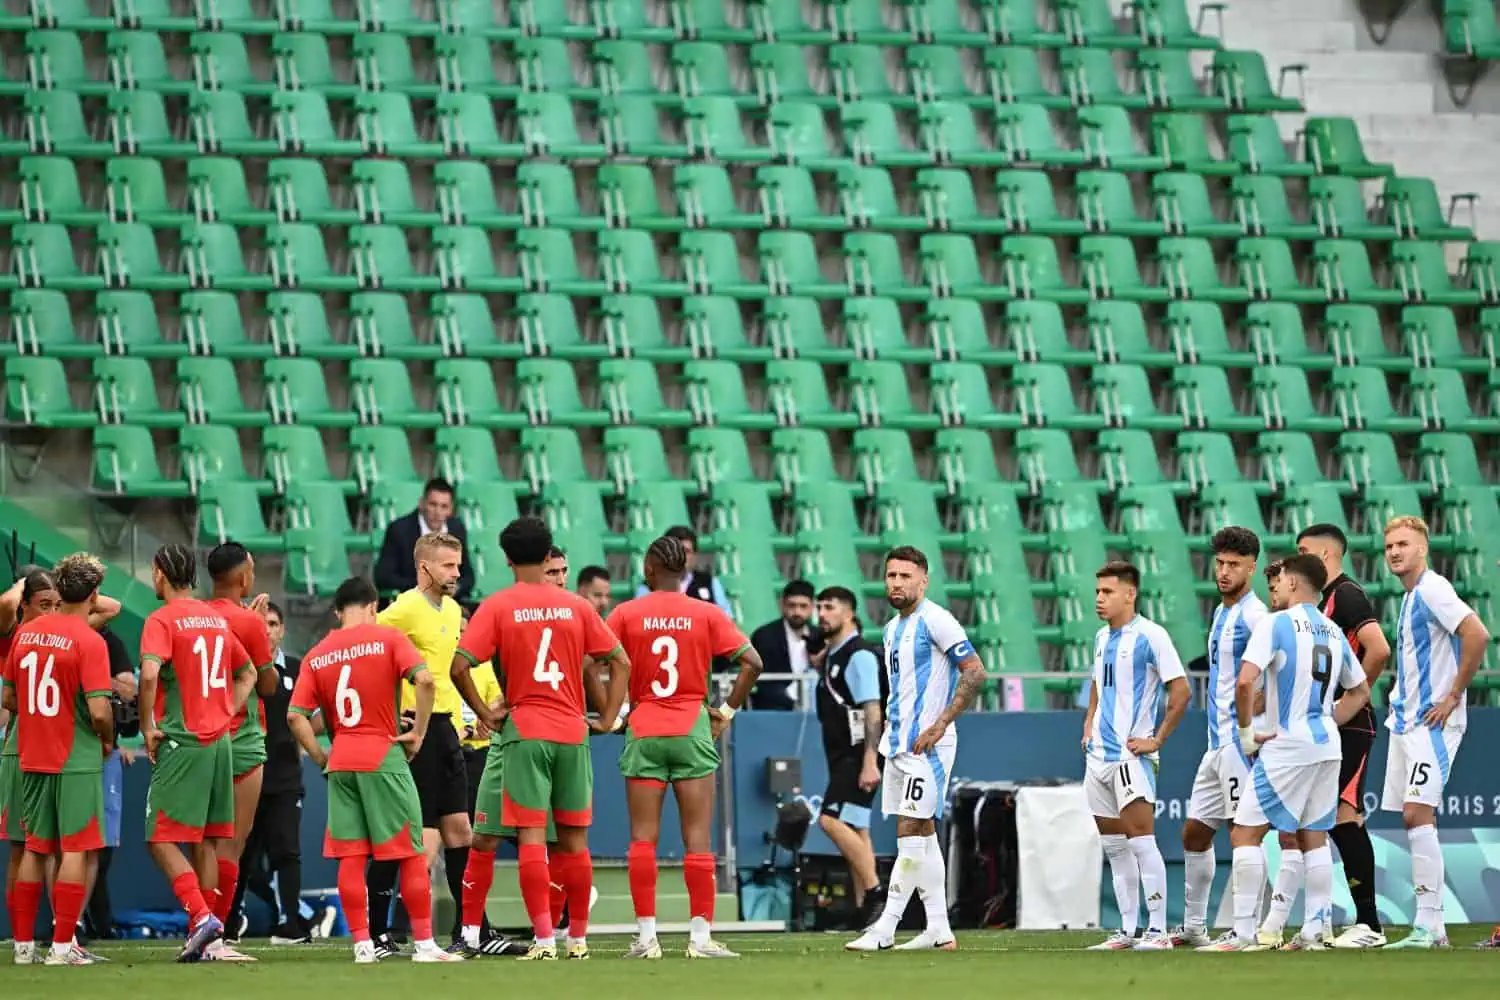 Chaos, crowd trouble as Morocco beat Argentina